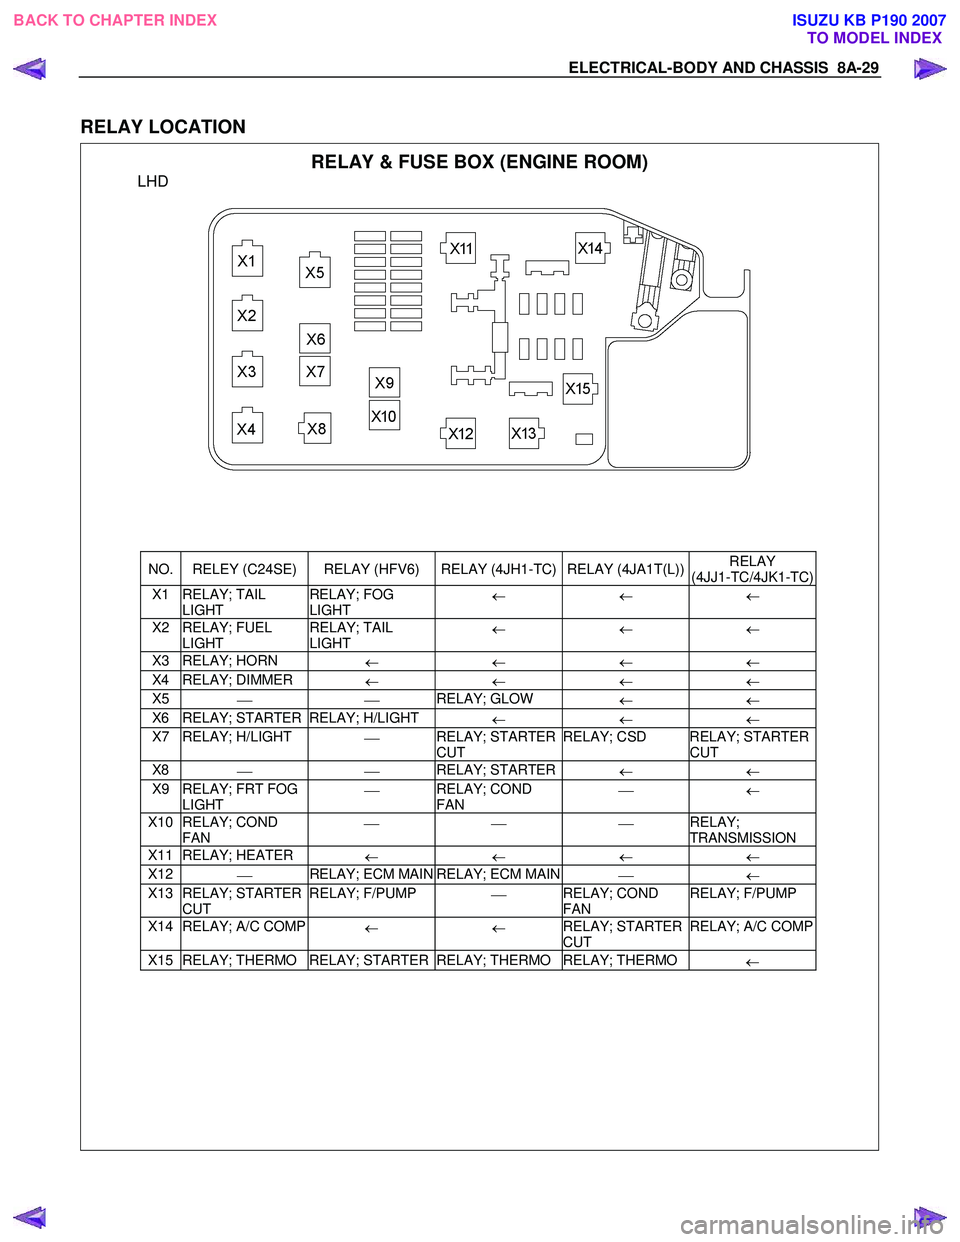 ISUZU KB P190 2007  Workshop User Guide ELECTRICAL-BODY AND CHASSIS  8A-29 
 
RELAY LOCATION 
 RELAY & FUSE BOX (ENGINE ROOM) 
LHD 
 
 
  
 
 
 
NO.  RELEY (C24SE)  RELAY (HFV6)  RELAY (4JH1-TC) RELAY (4JA1T(L))  RELAY 
(4JJ1-TC/4JK1-TC)
X1